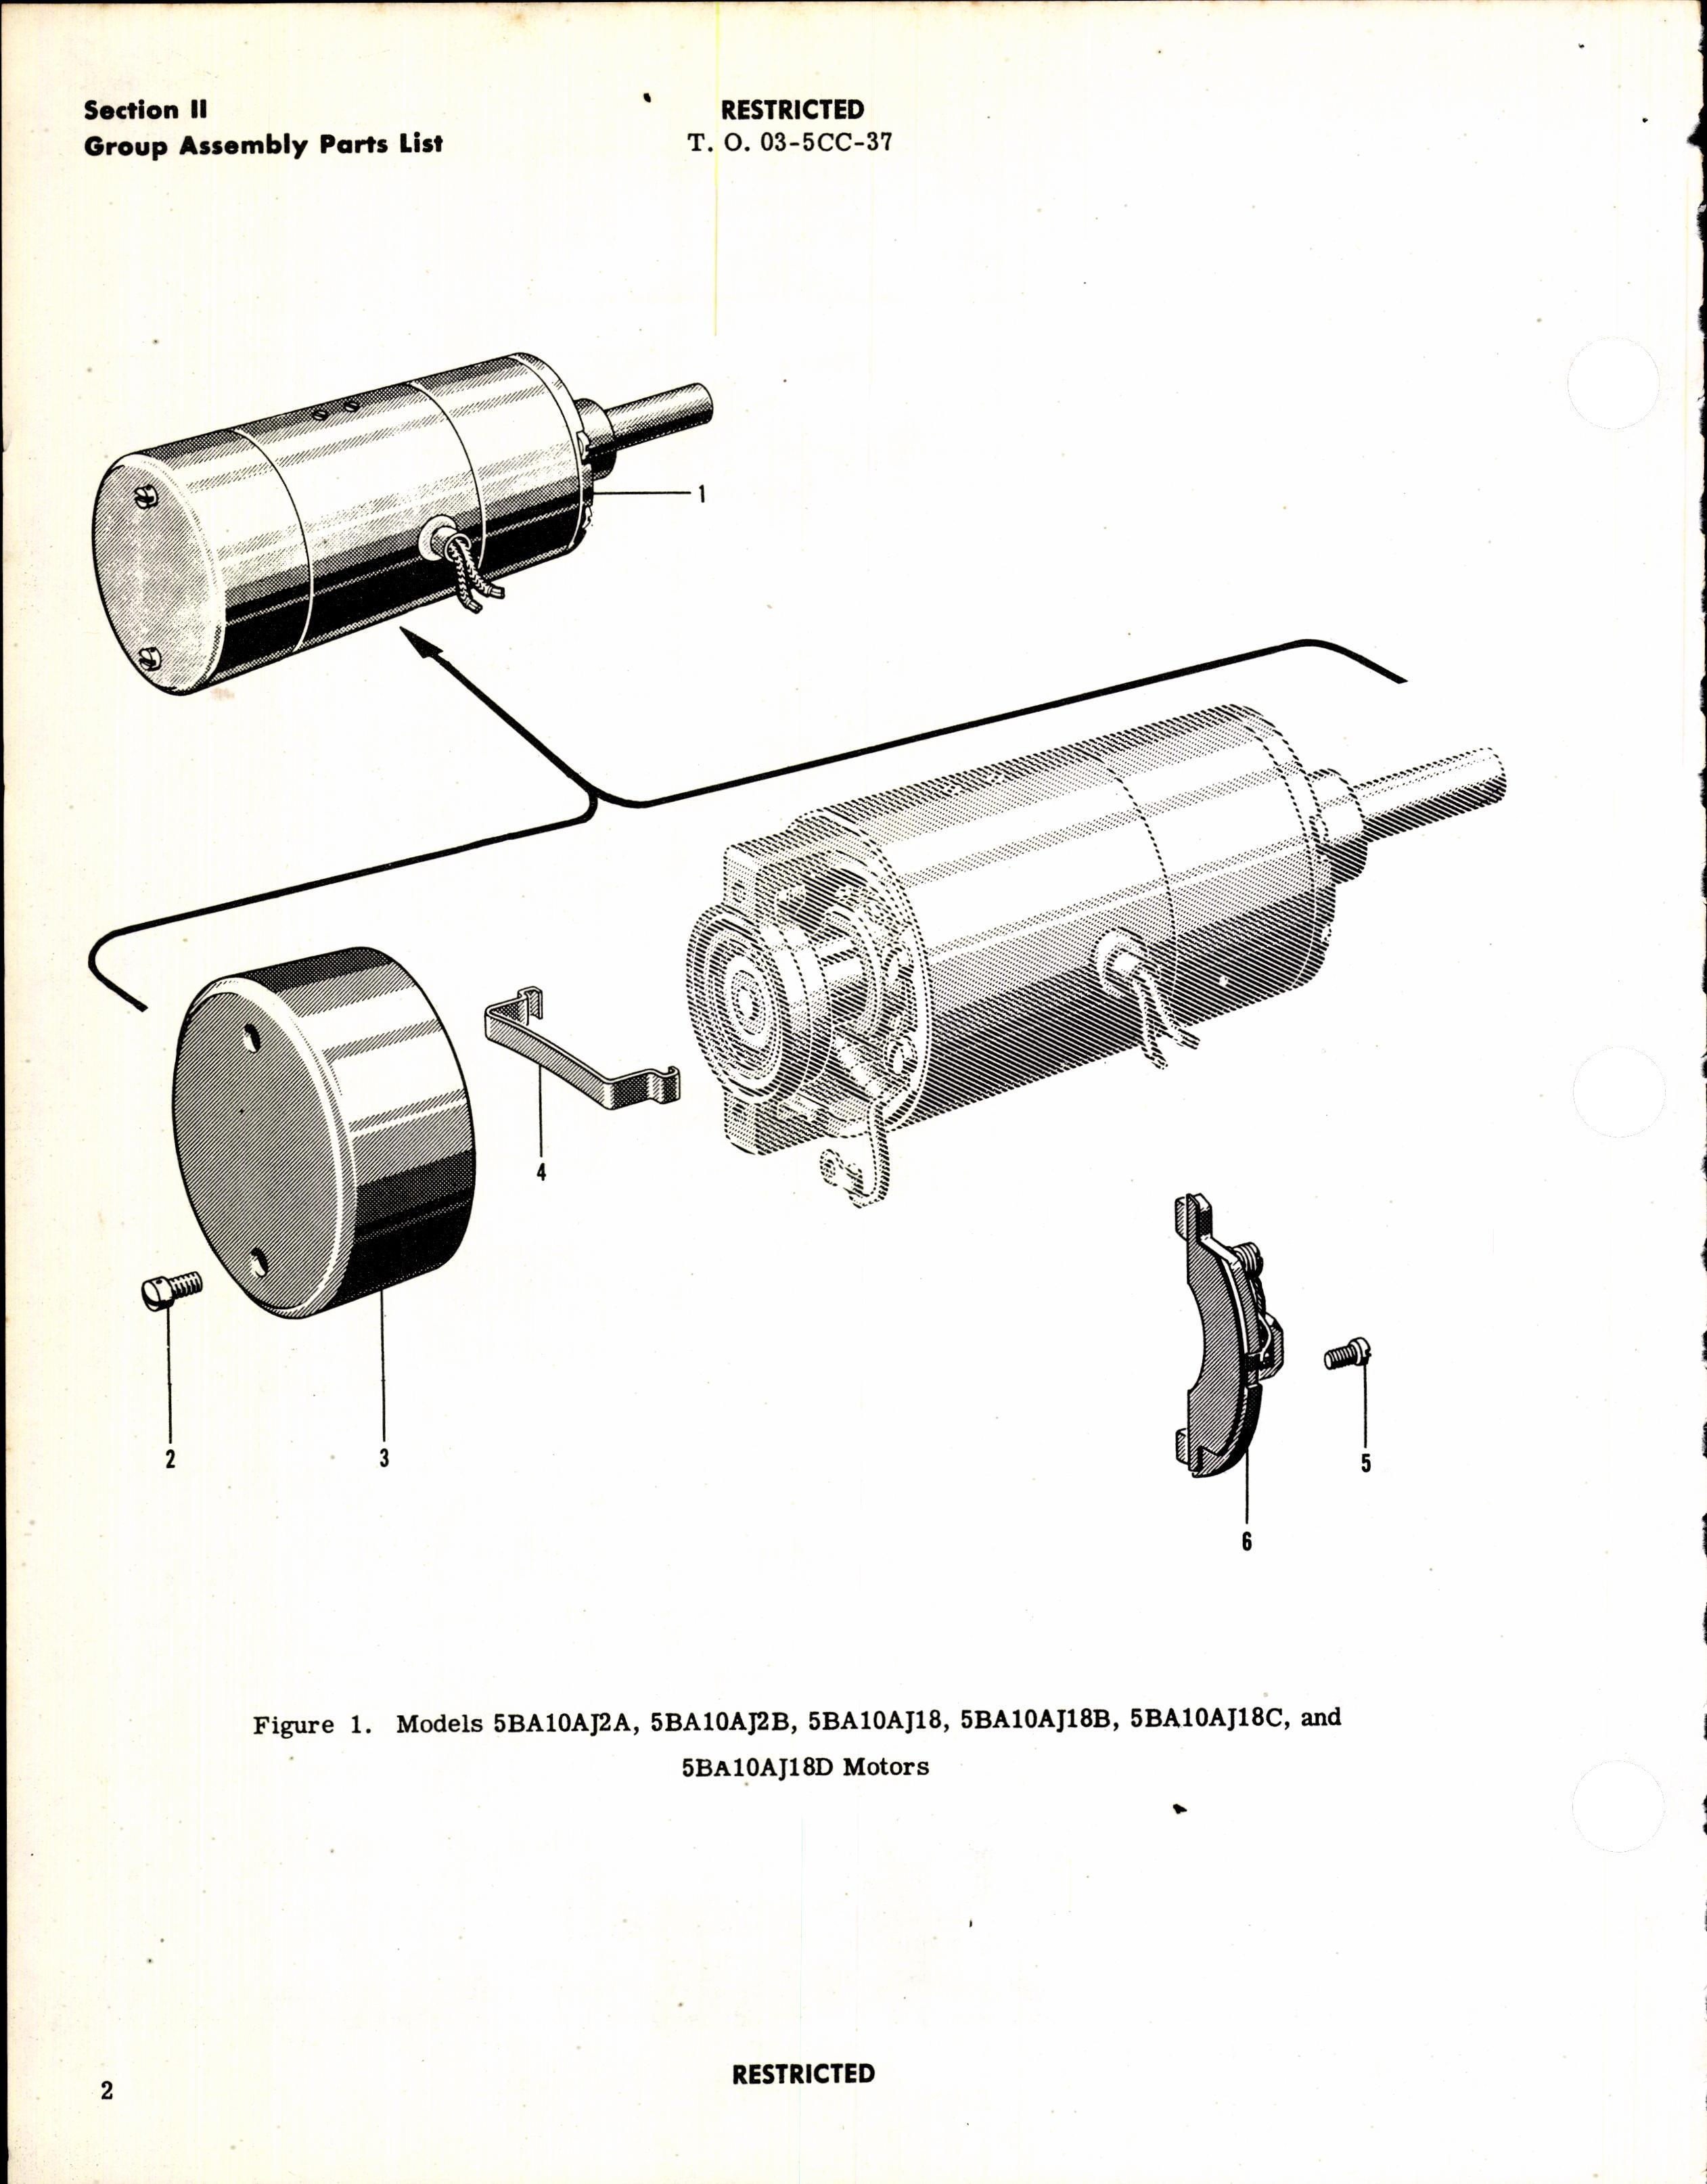 Sample page 4 from AirCorps Library document: Parts Catalog for General Electric Series 5BA10 Aircraft Motor